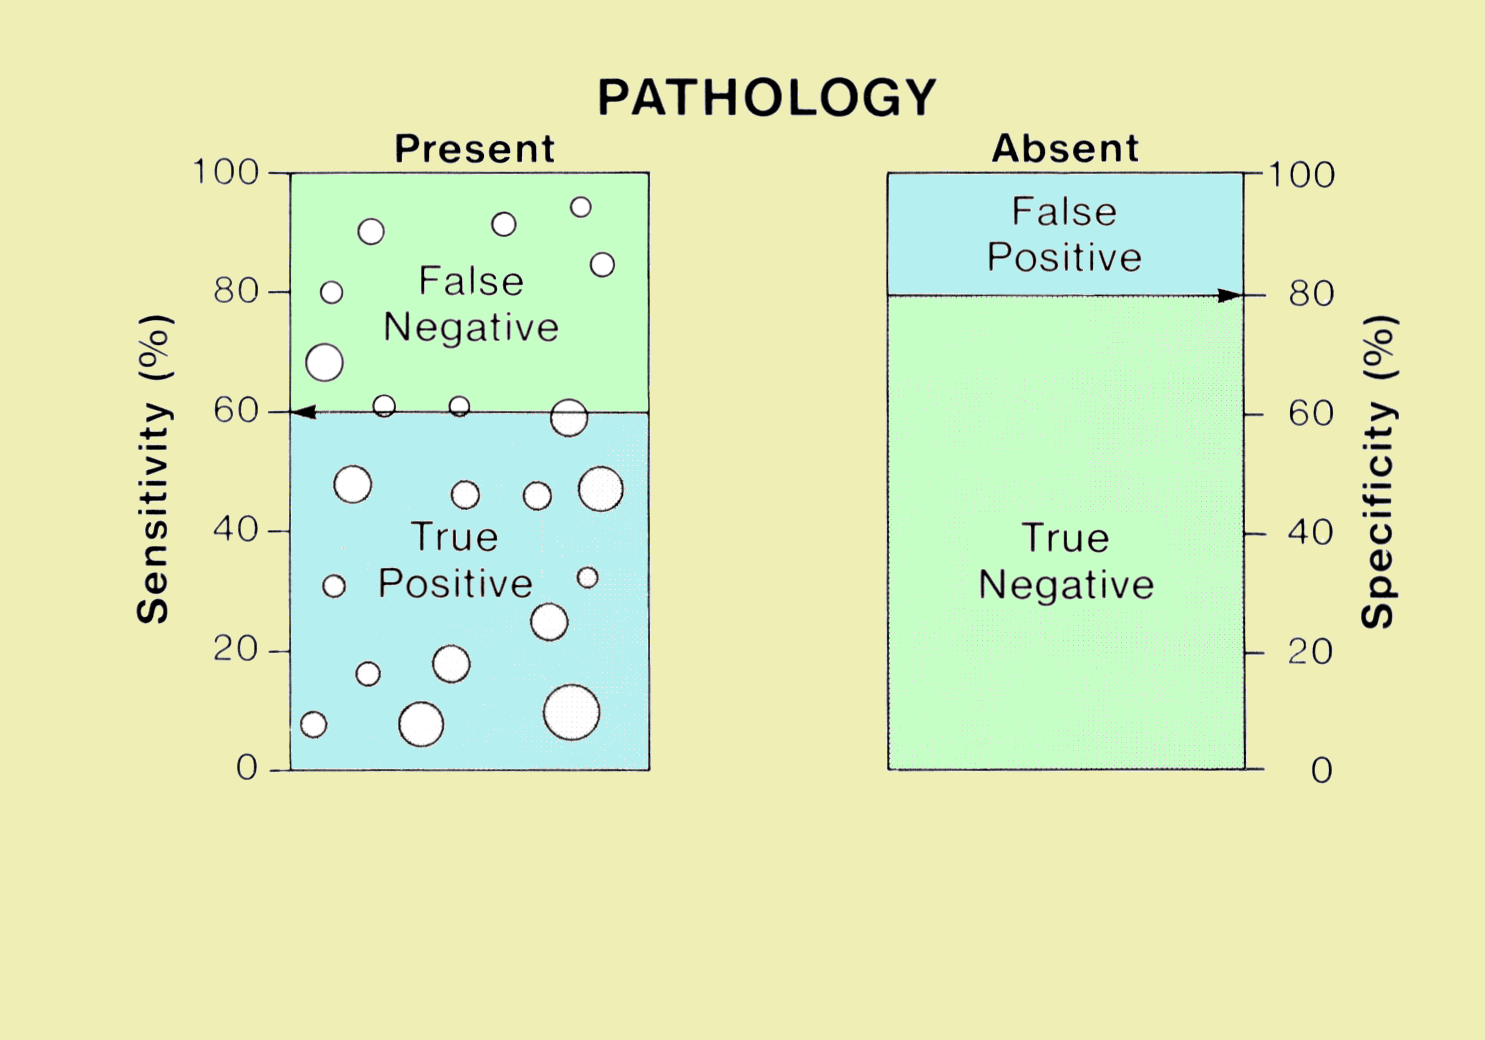 Relationship of True and False Diagnostic Decisions to Sensitivity and Specificity